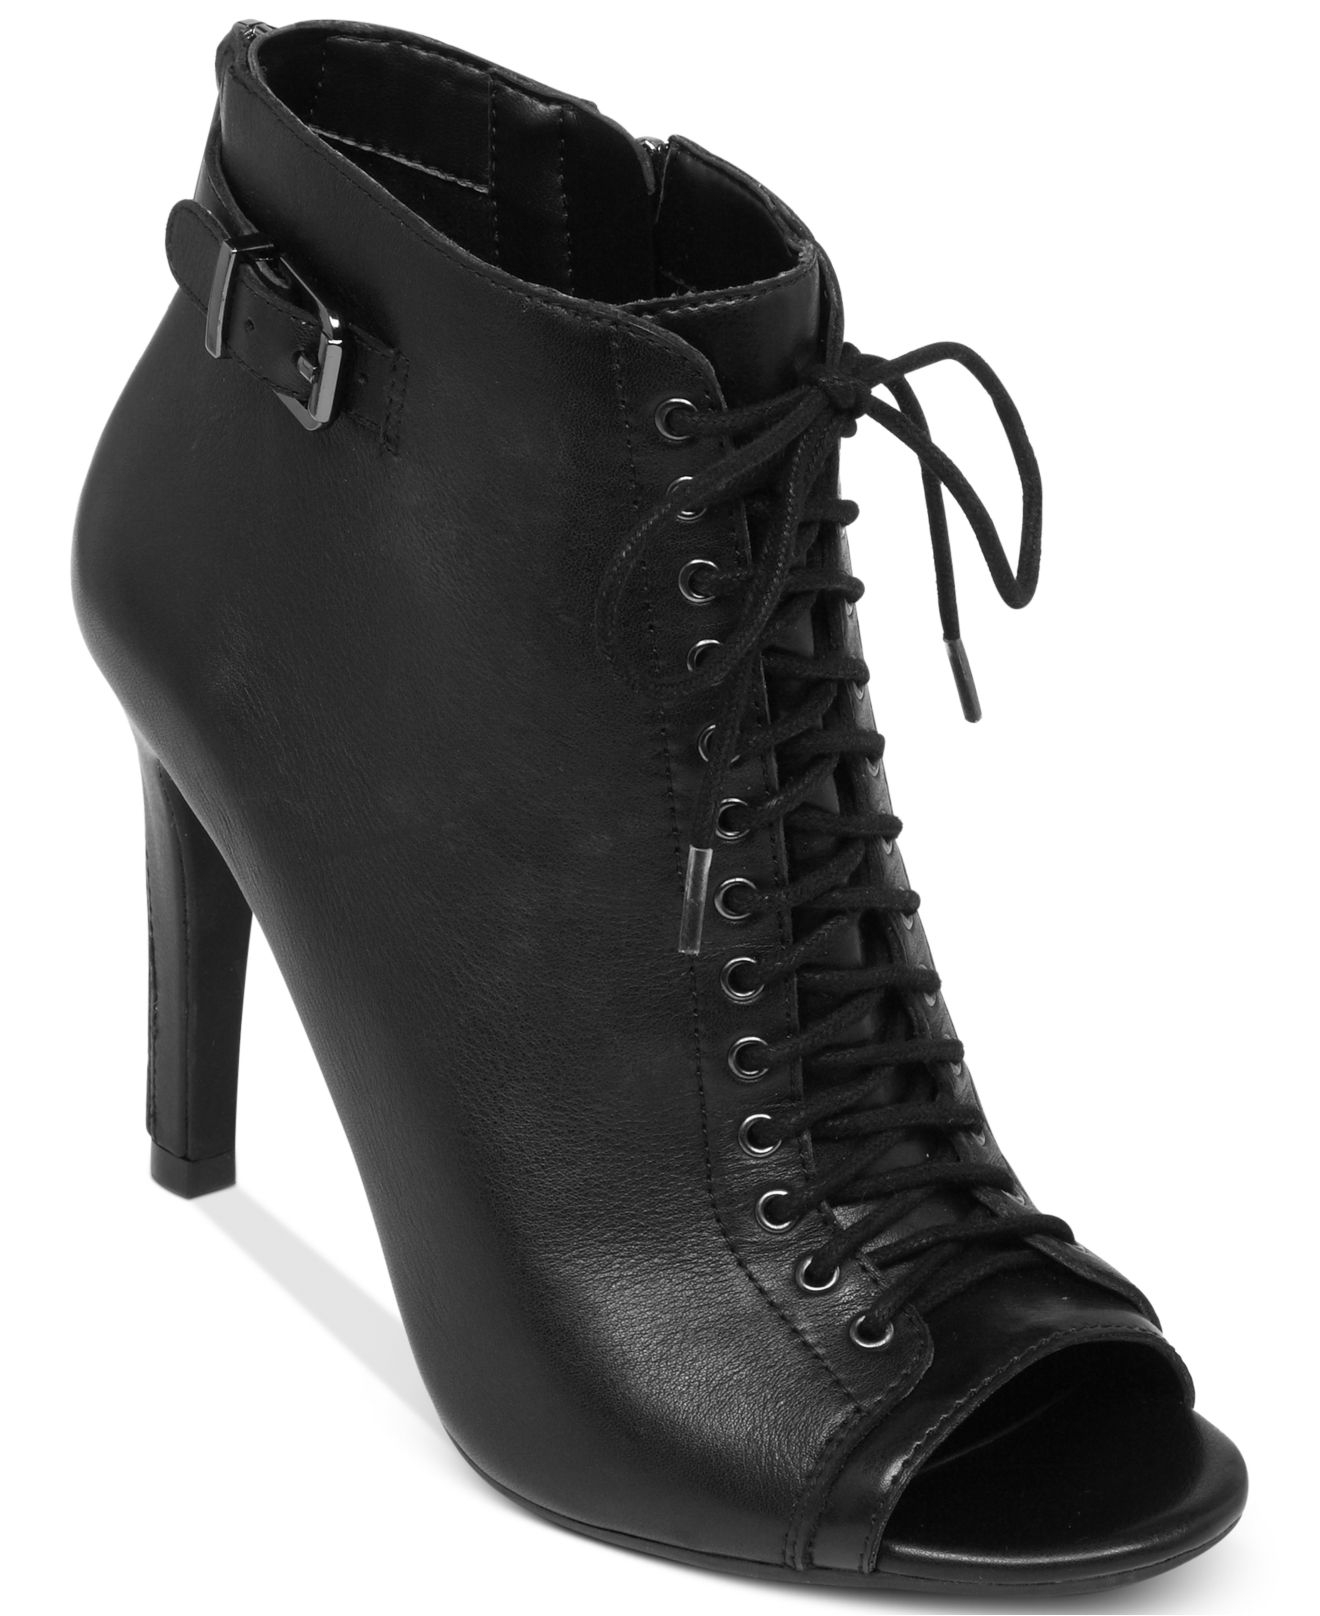 Jessica Simpson Erlene Lace Up Booties in Black - Lyst